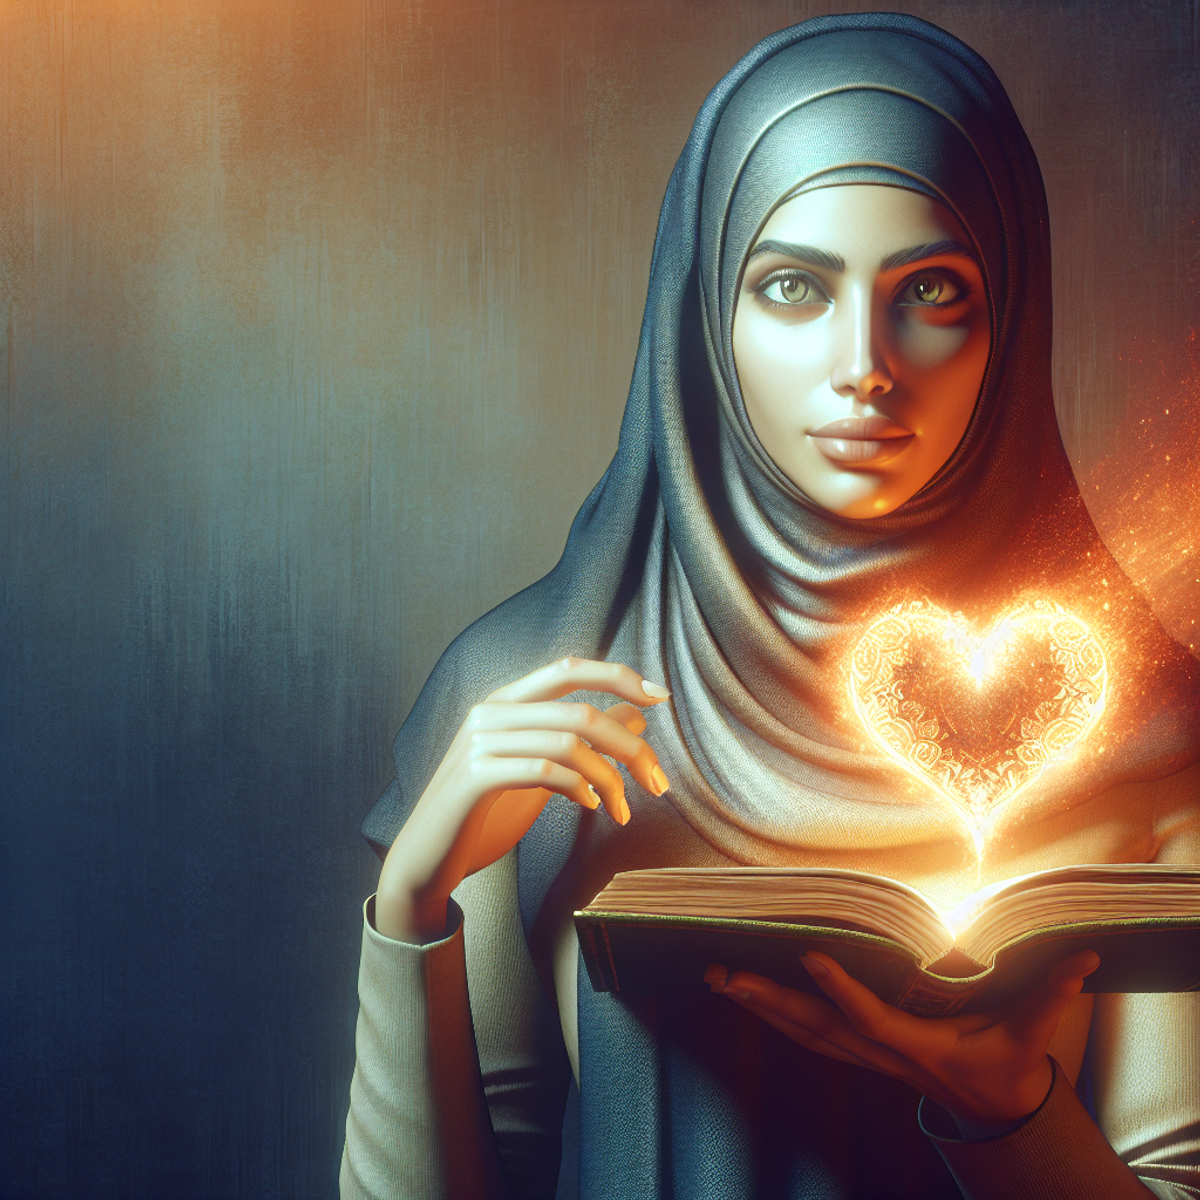 Middle-Eastern woman holding an open book with glowing heart emanating alt text